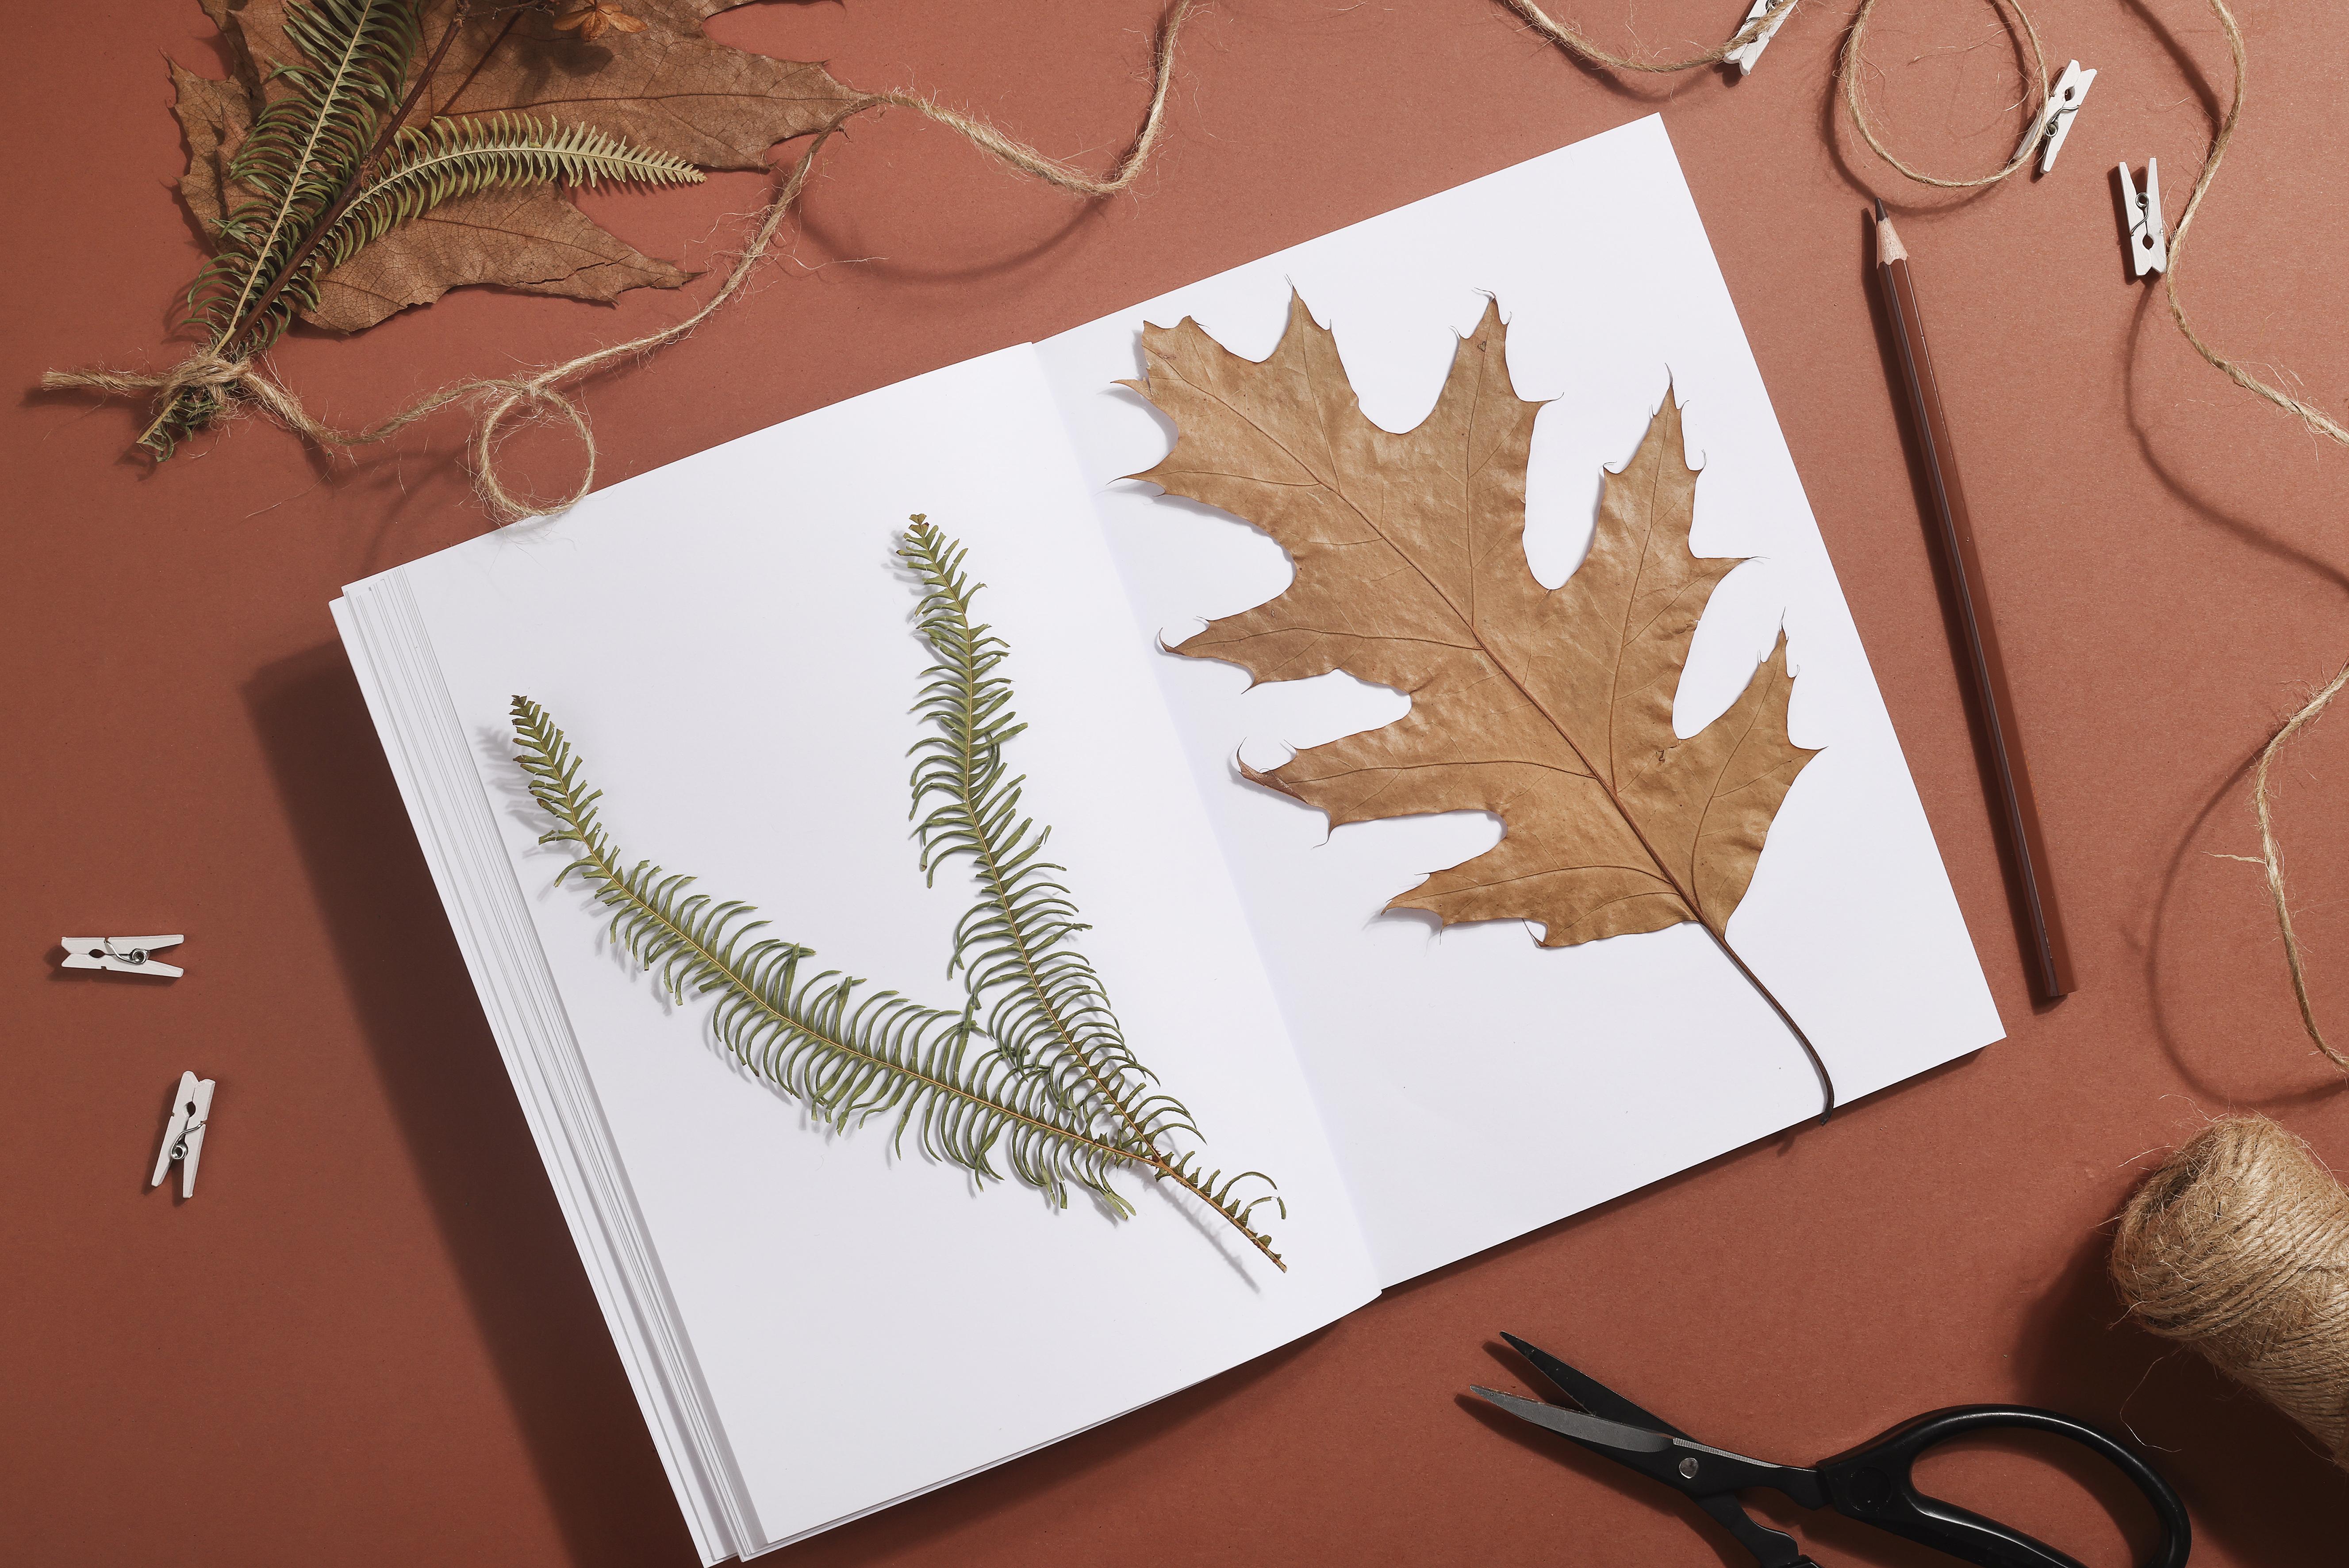 leaves on paper